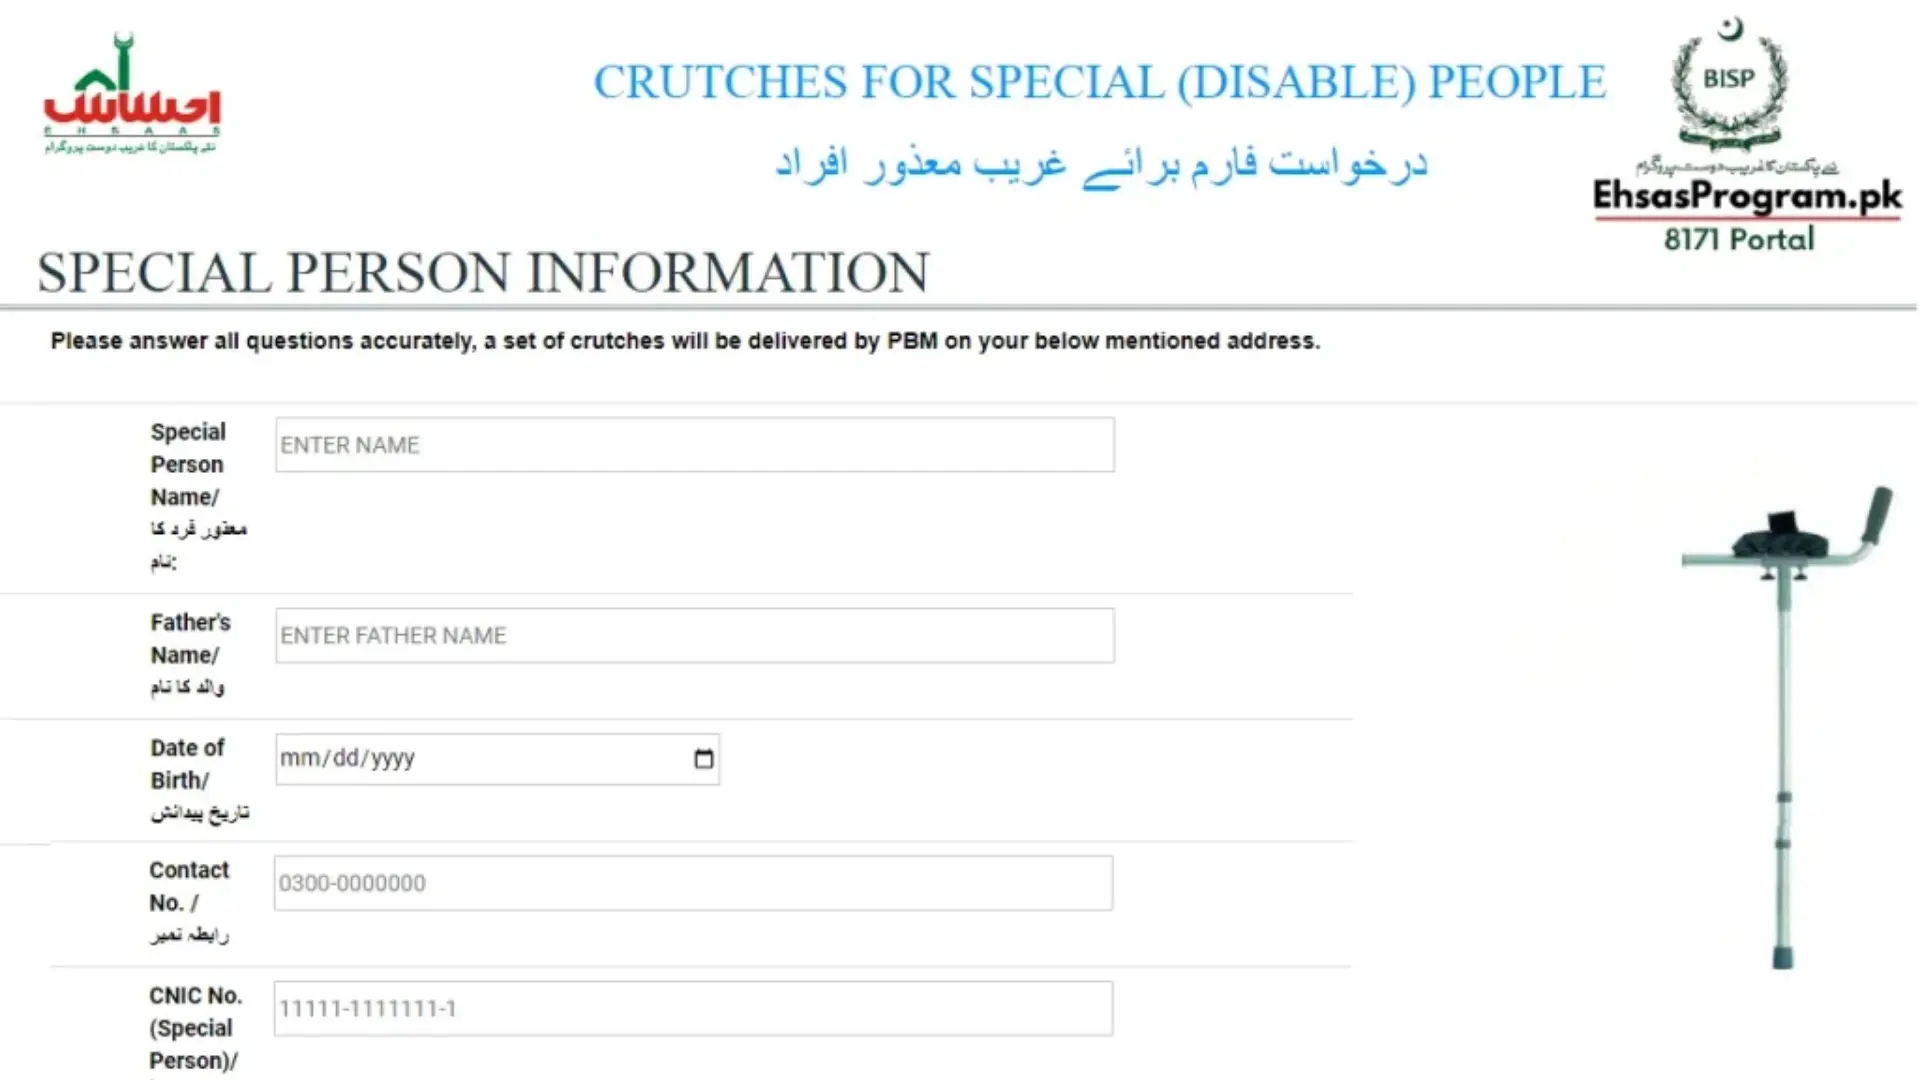 Crutches Under Ehsaas Disabled Person Program